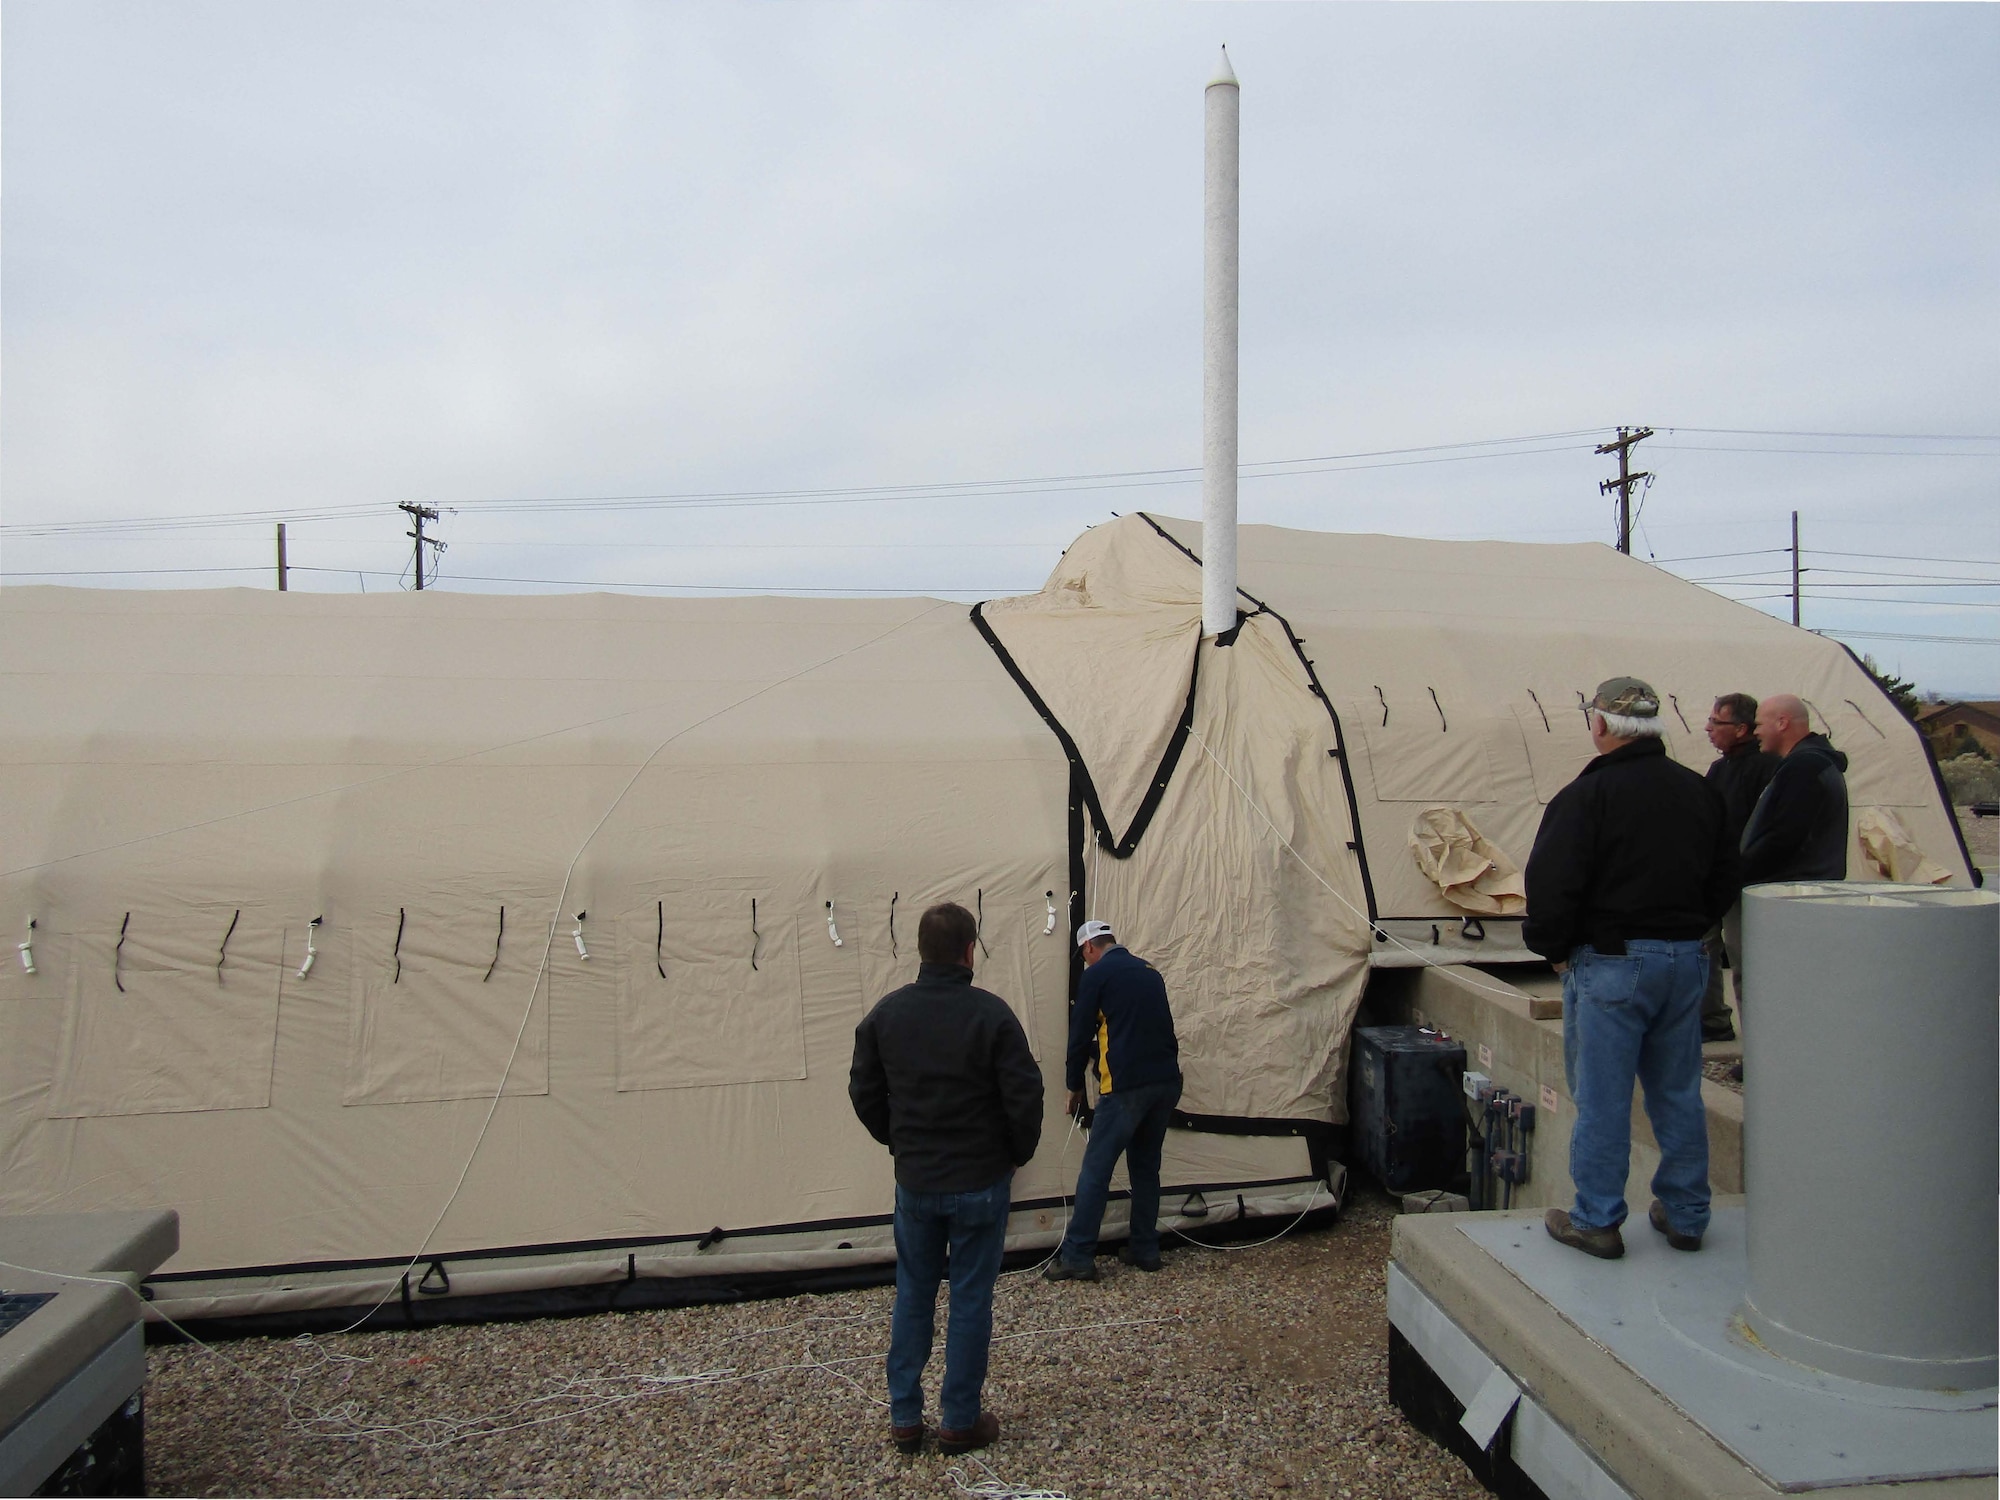 Inflatable shelter covering Launch Facility during proof of concept demonstration at Space & Missile Integration Complex facility located at Hill Air Force Base, Utah, Nov. 17, 2016. (U.S. Air Force photo)